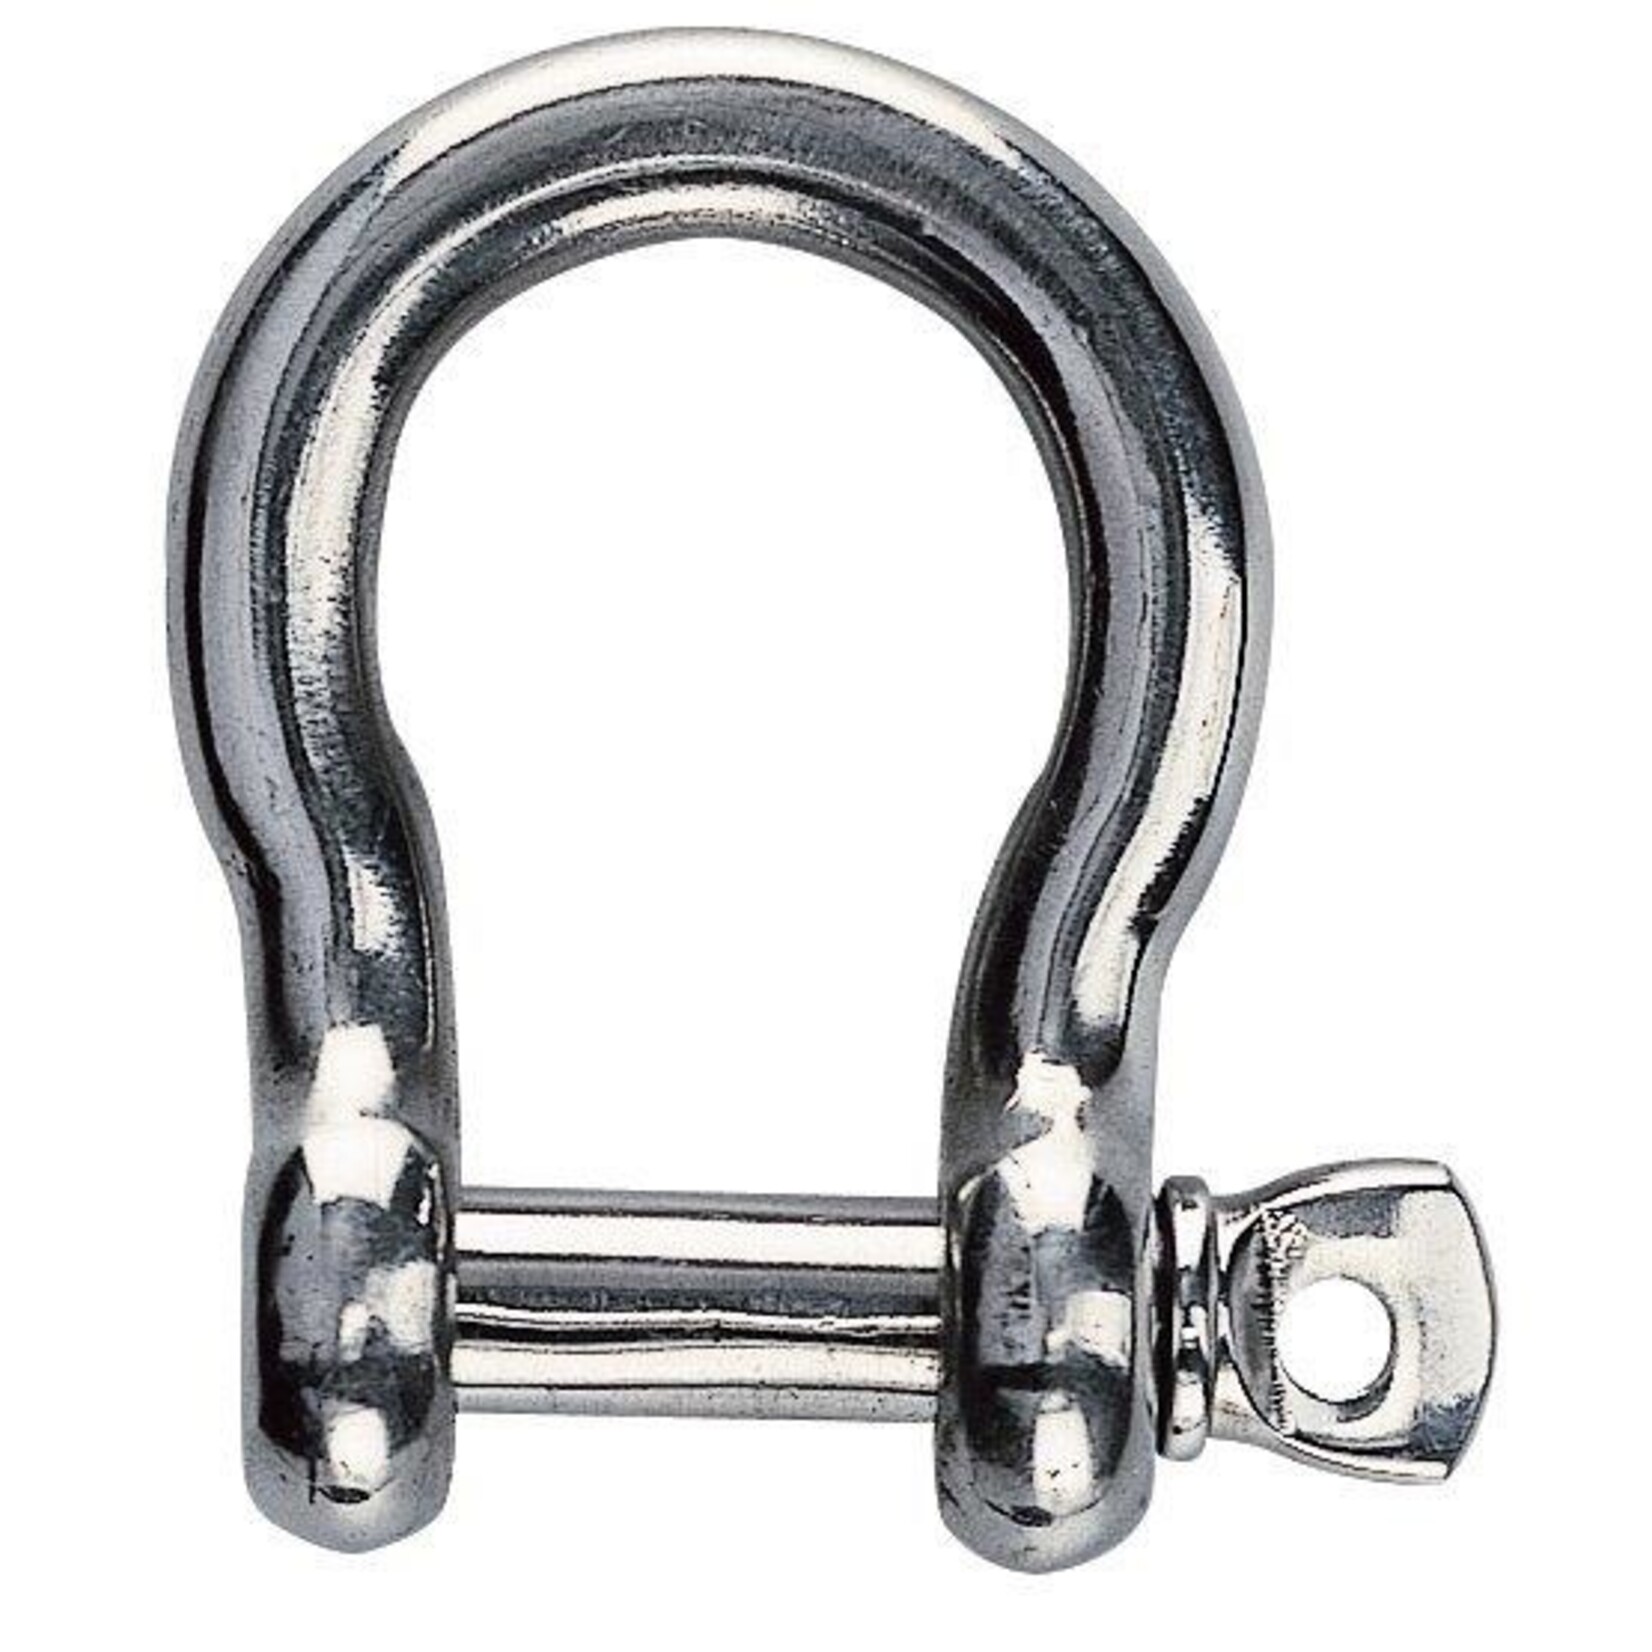 Plastimo Bow shackle free st.s 316 dia 20mm